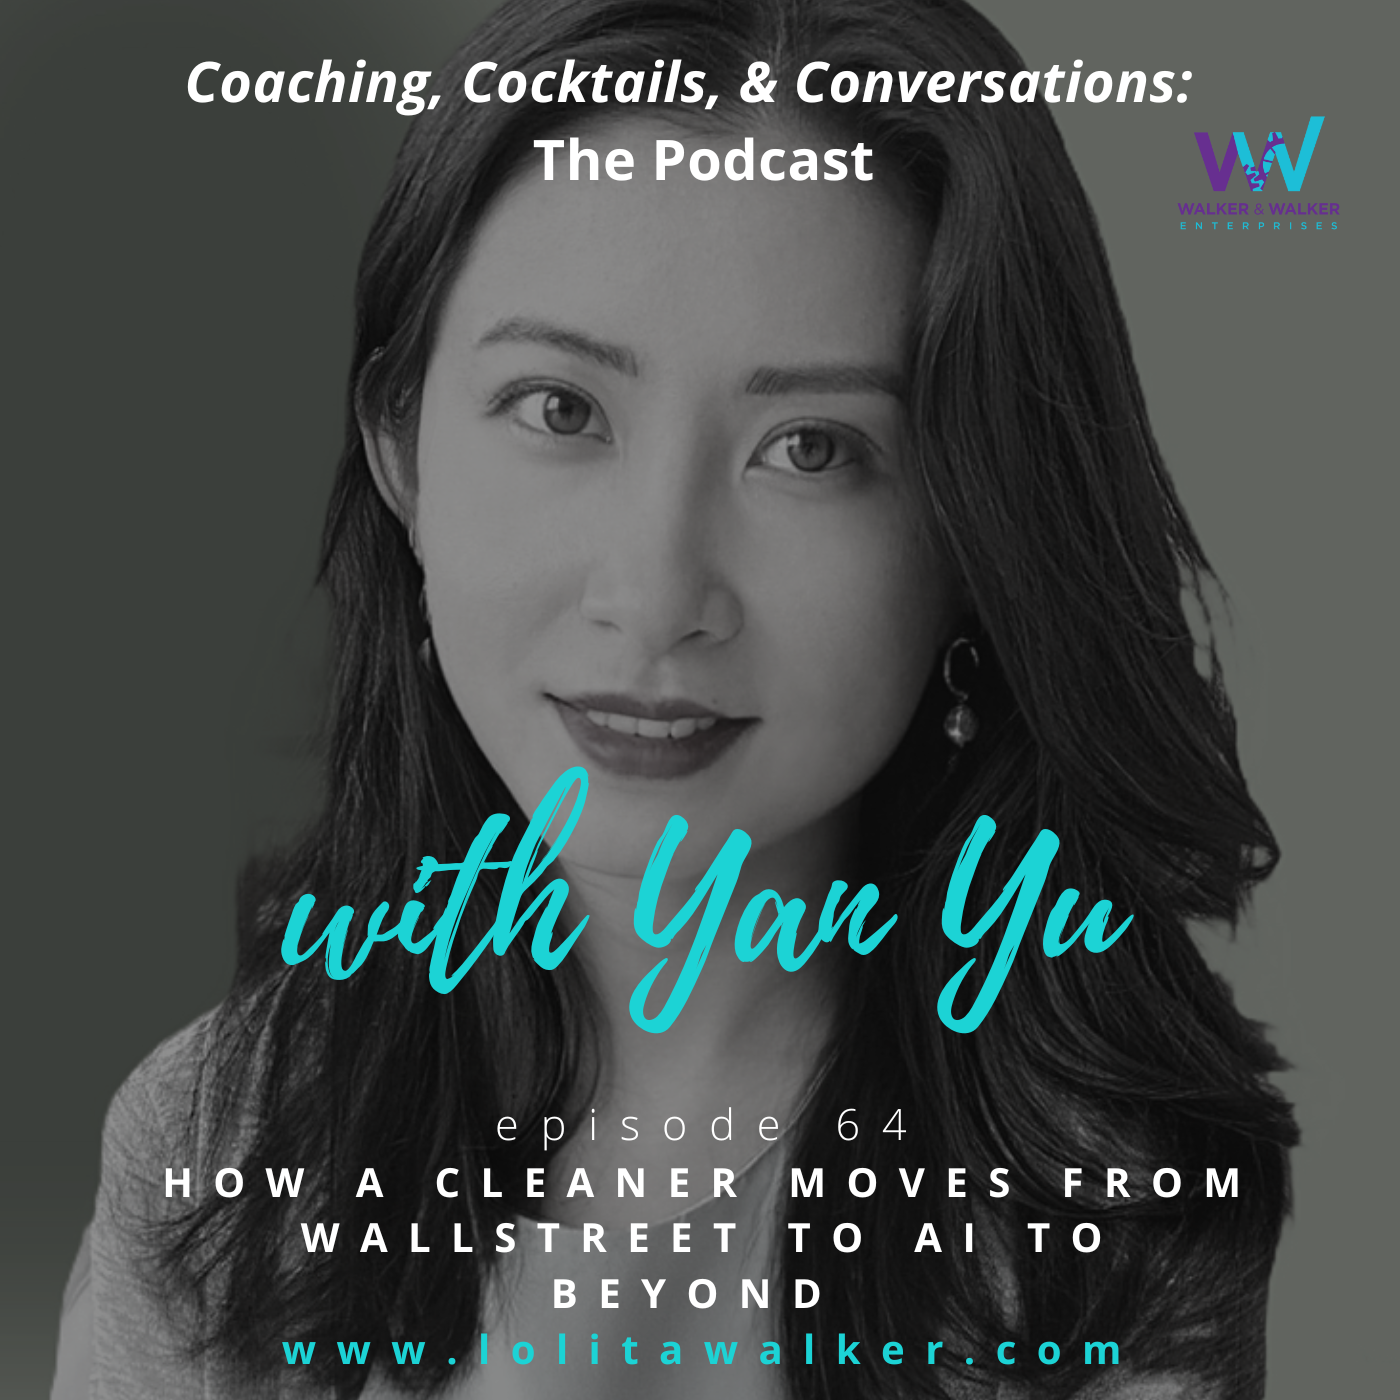 S3E64 - How to Go From Cleaner to Wall Street to AI to Beyond (with Yan Yu) Image